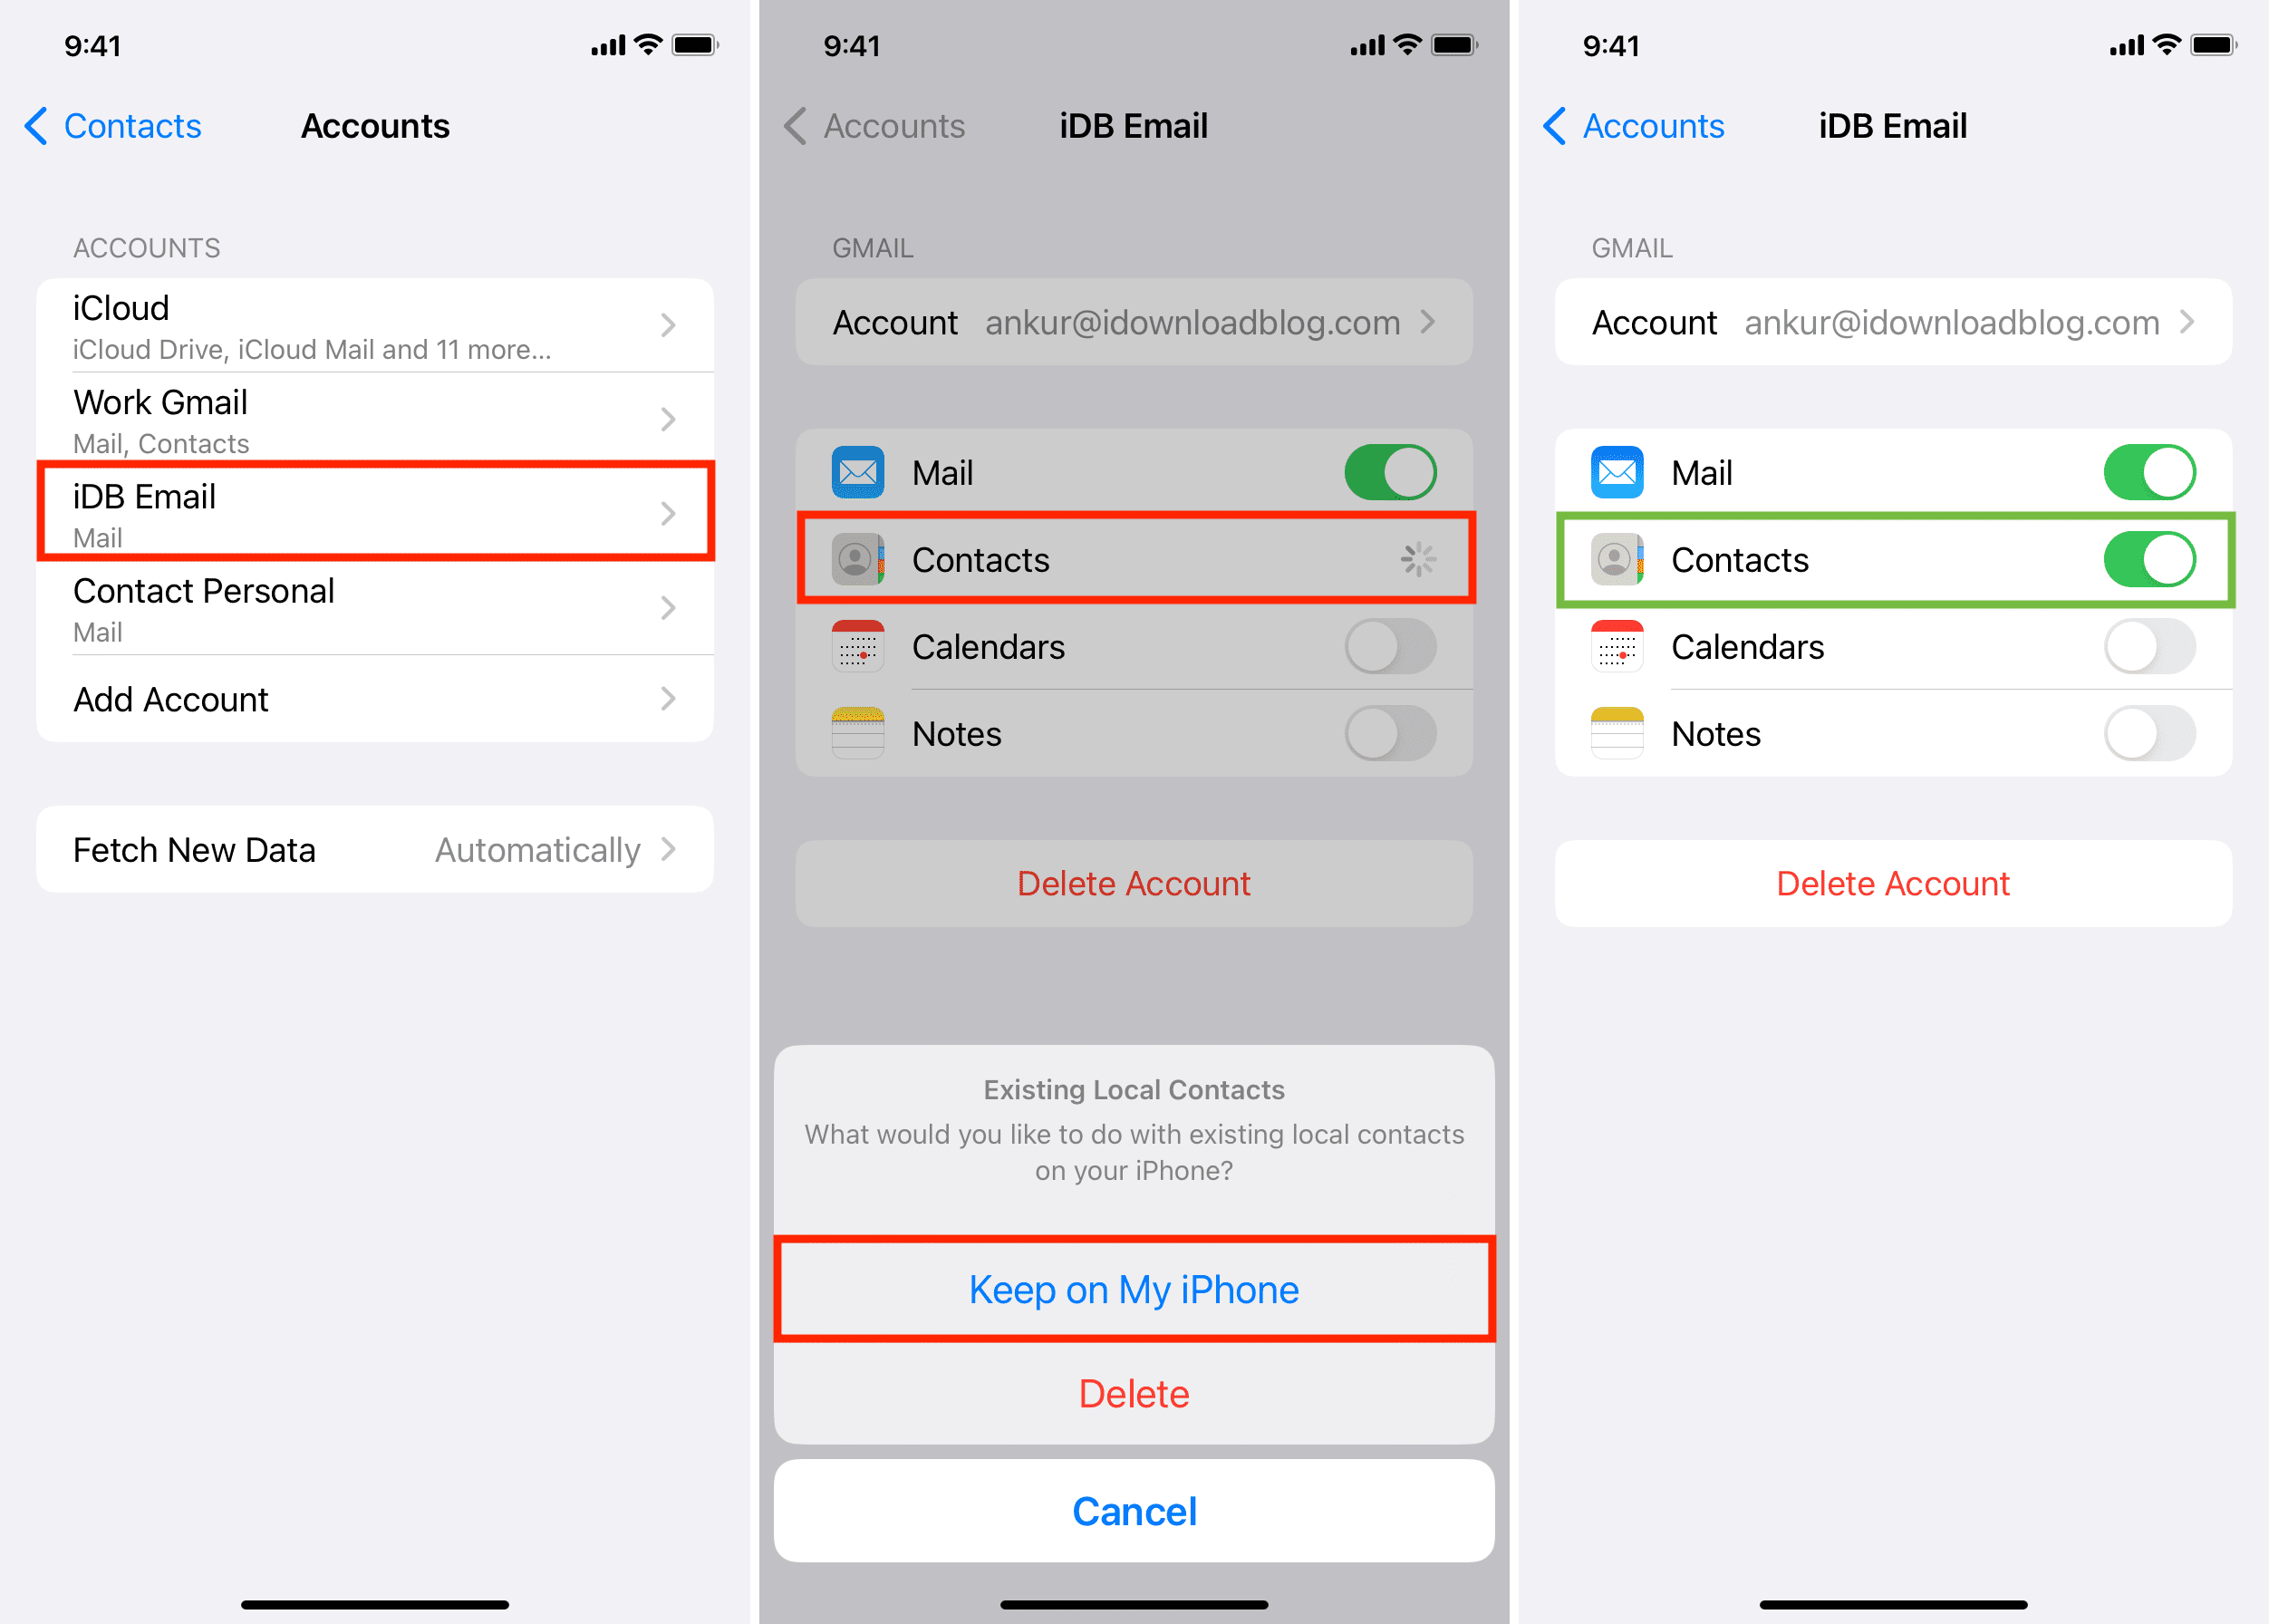 Enable Contacts and choose to Keep on My iPhone